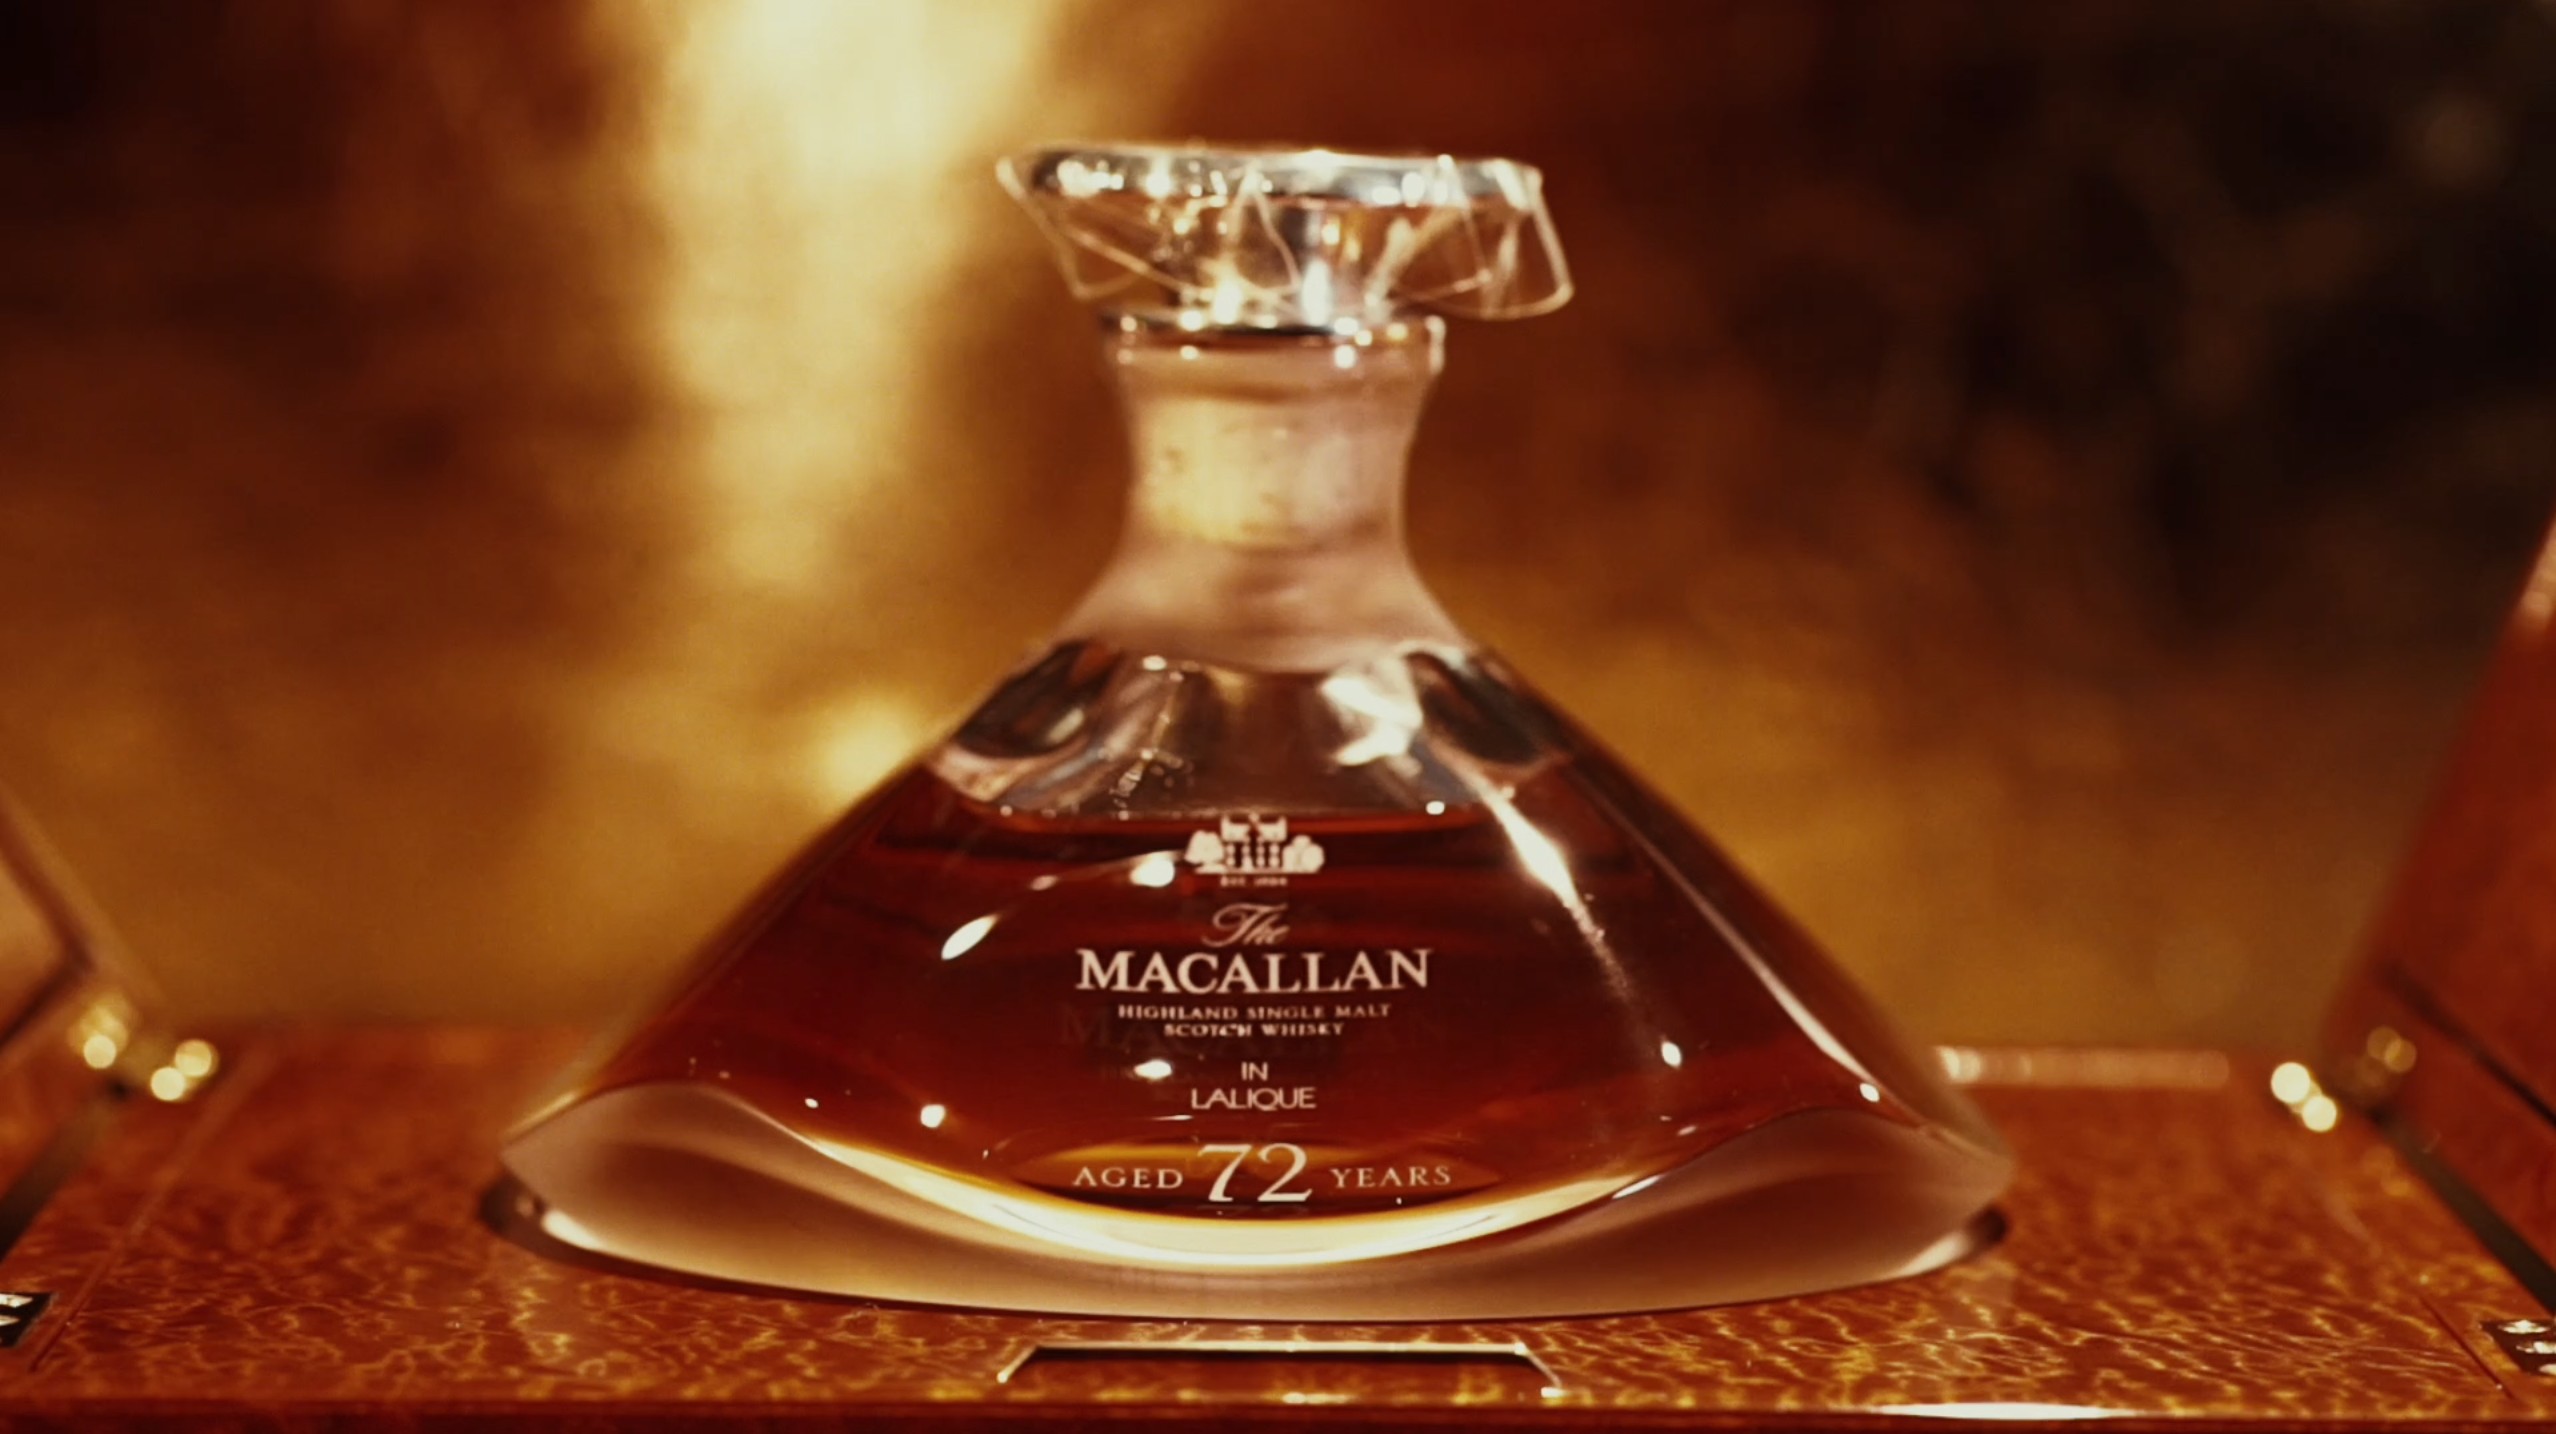 The Macallan Genesis In Lalique 72 Years Old Maxxium Russia